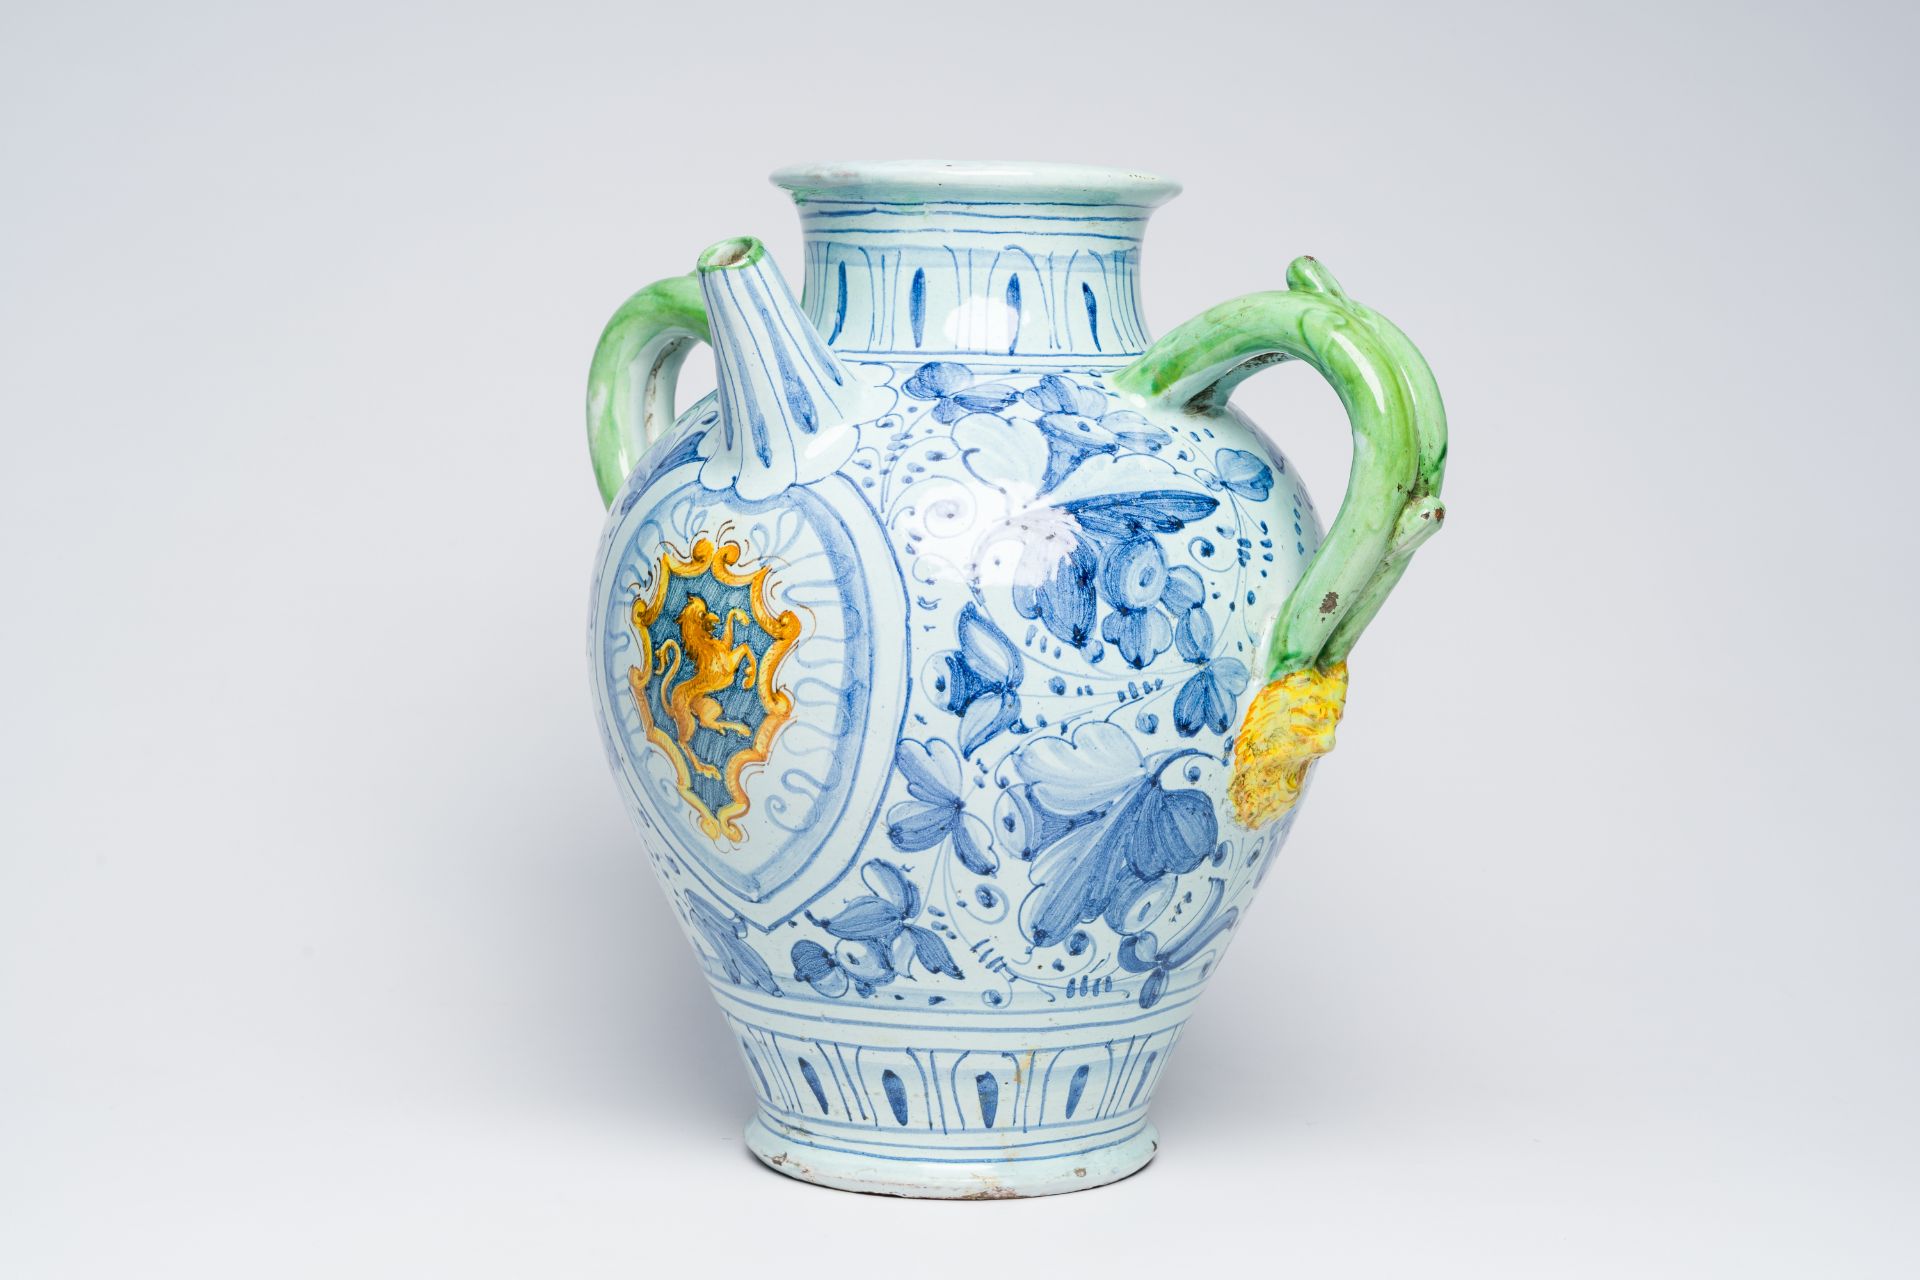 A large Italian polychrome maiolica pharmacy jar with a coat of arms and floral design, possibly 17t